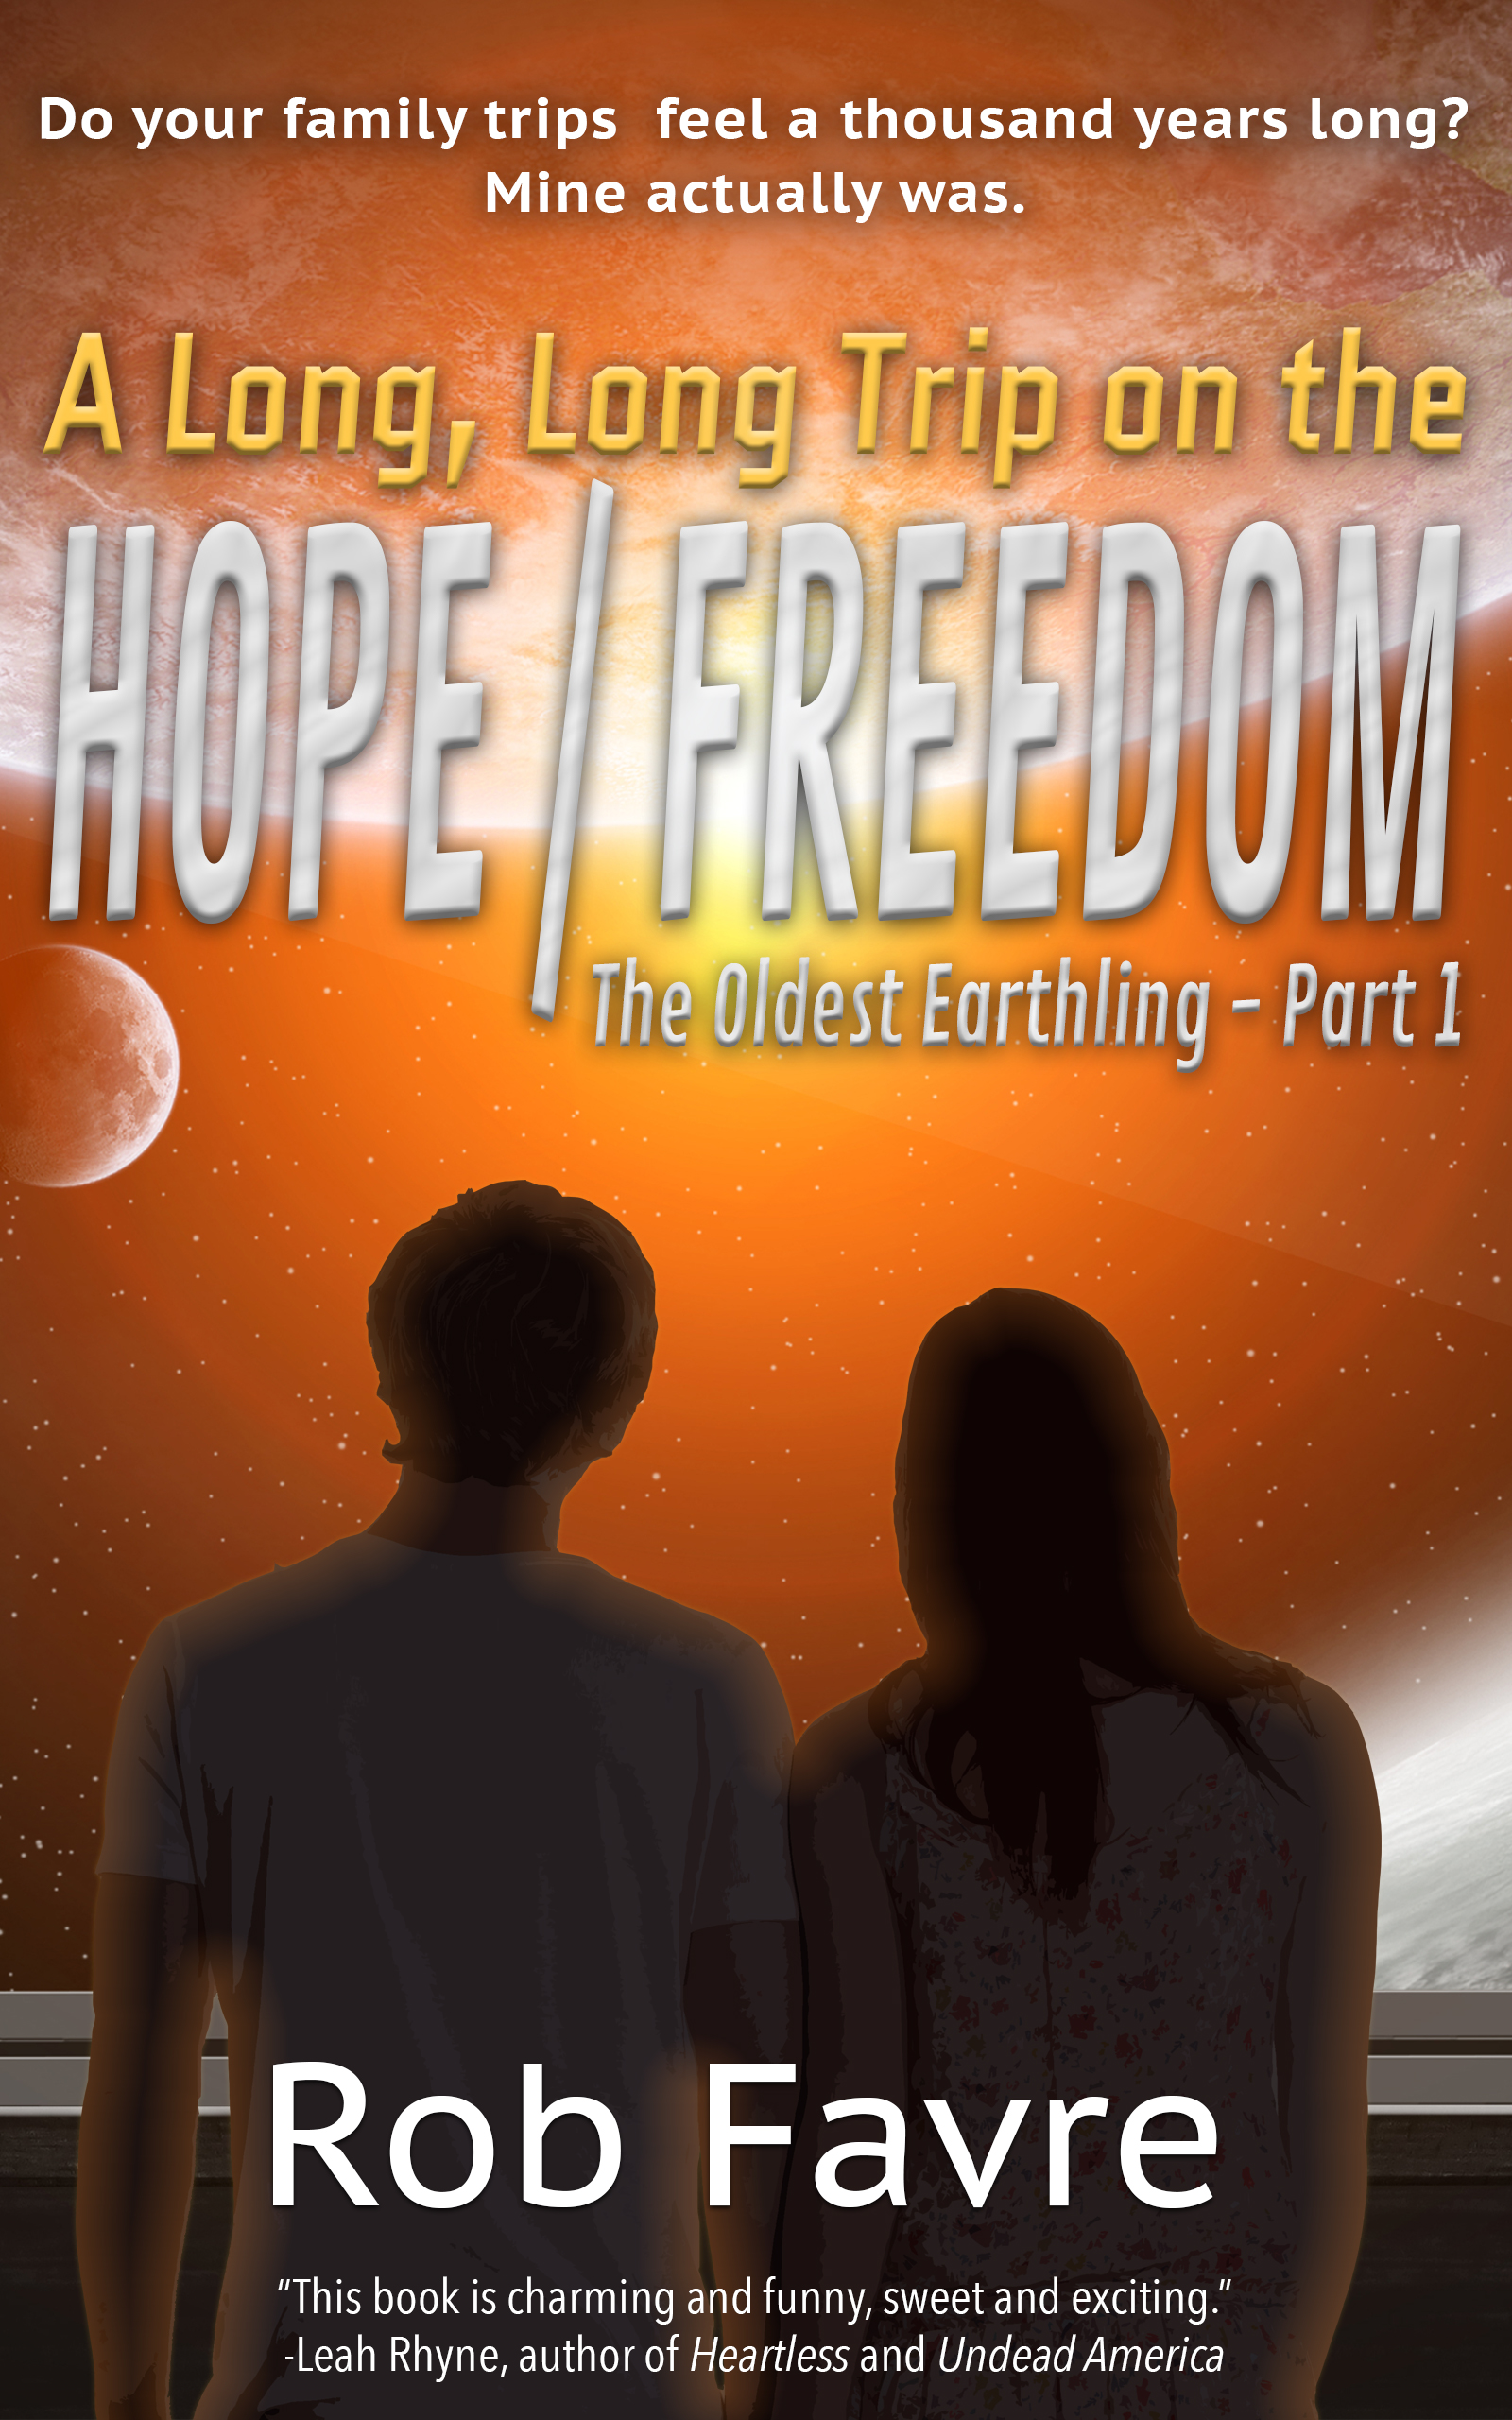 FREE: A Long, Long Trip on the Hope/Freedom by Rob Favre